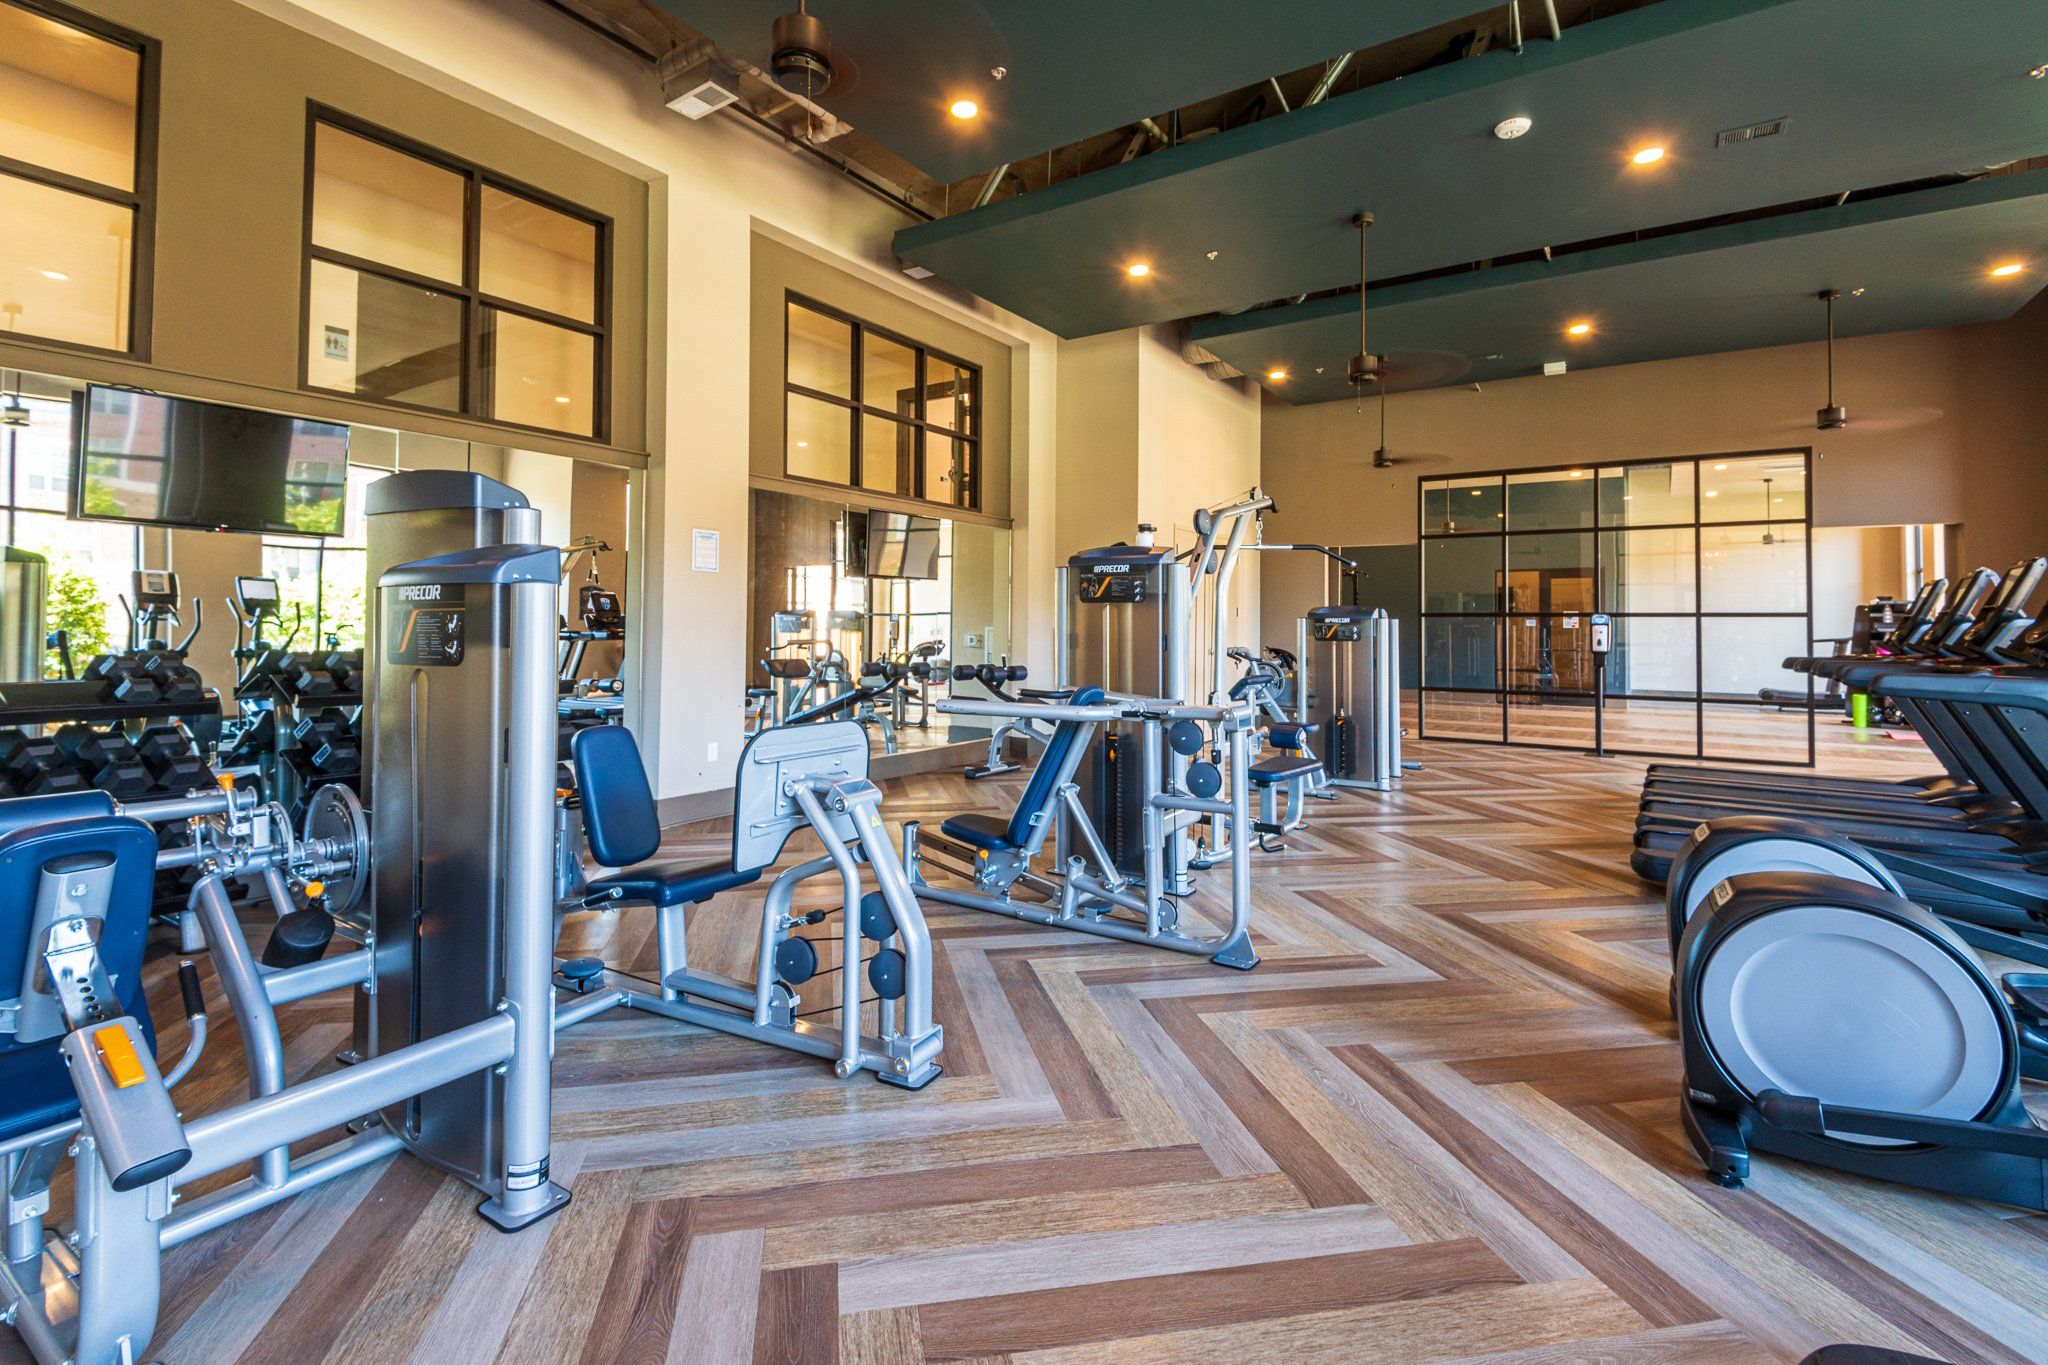 Large Chapel Hill fitness center with exercise machines and cardio machines